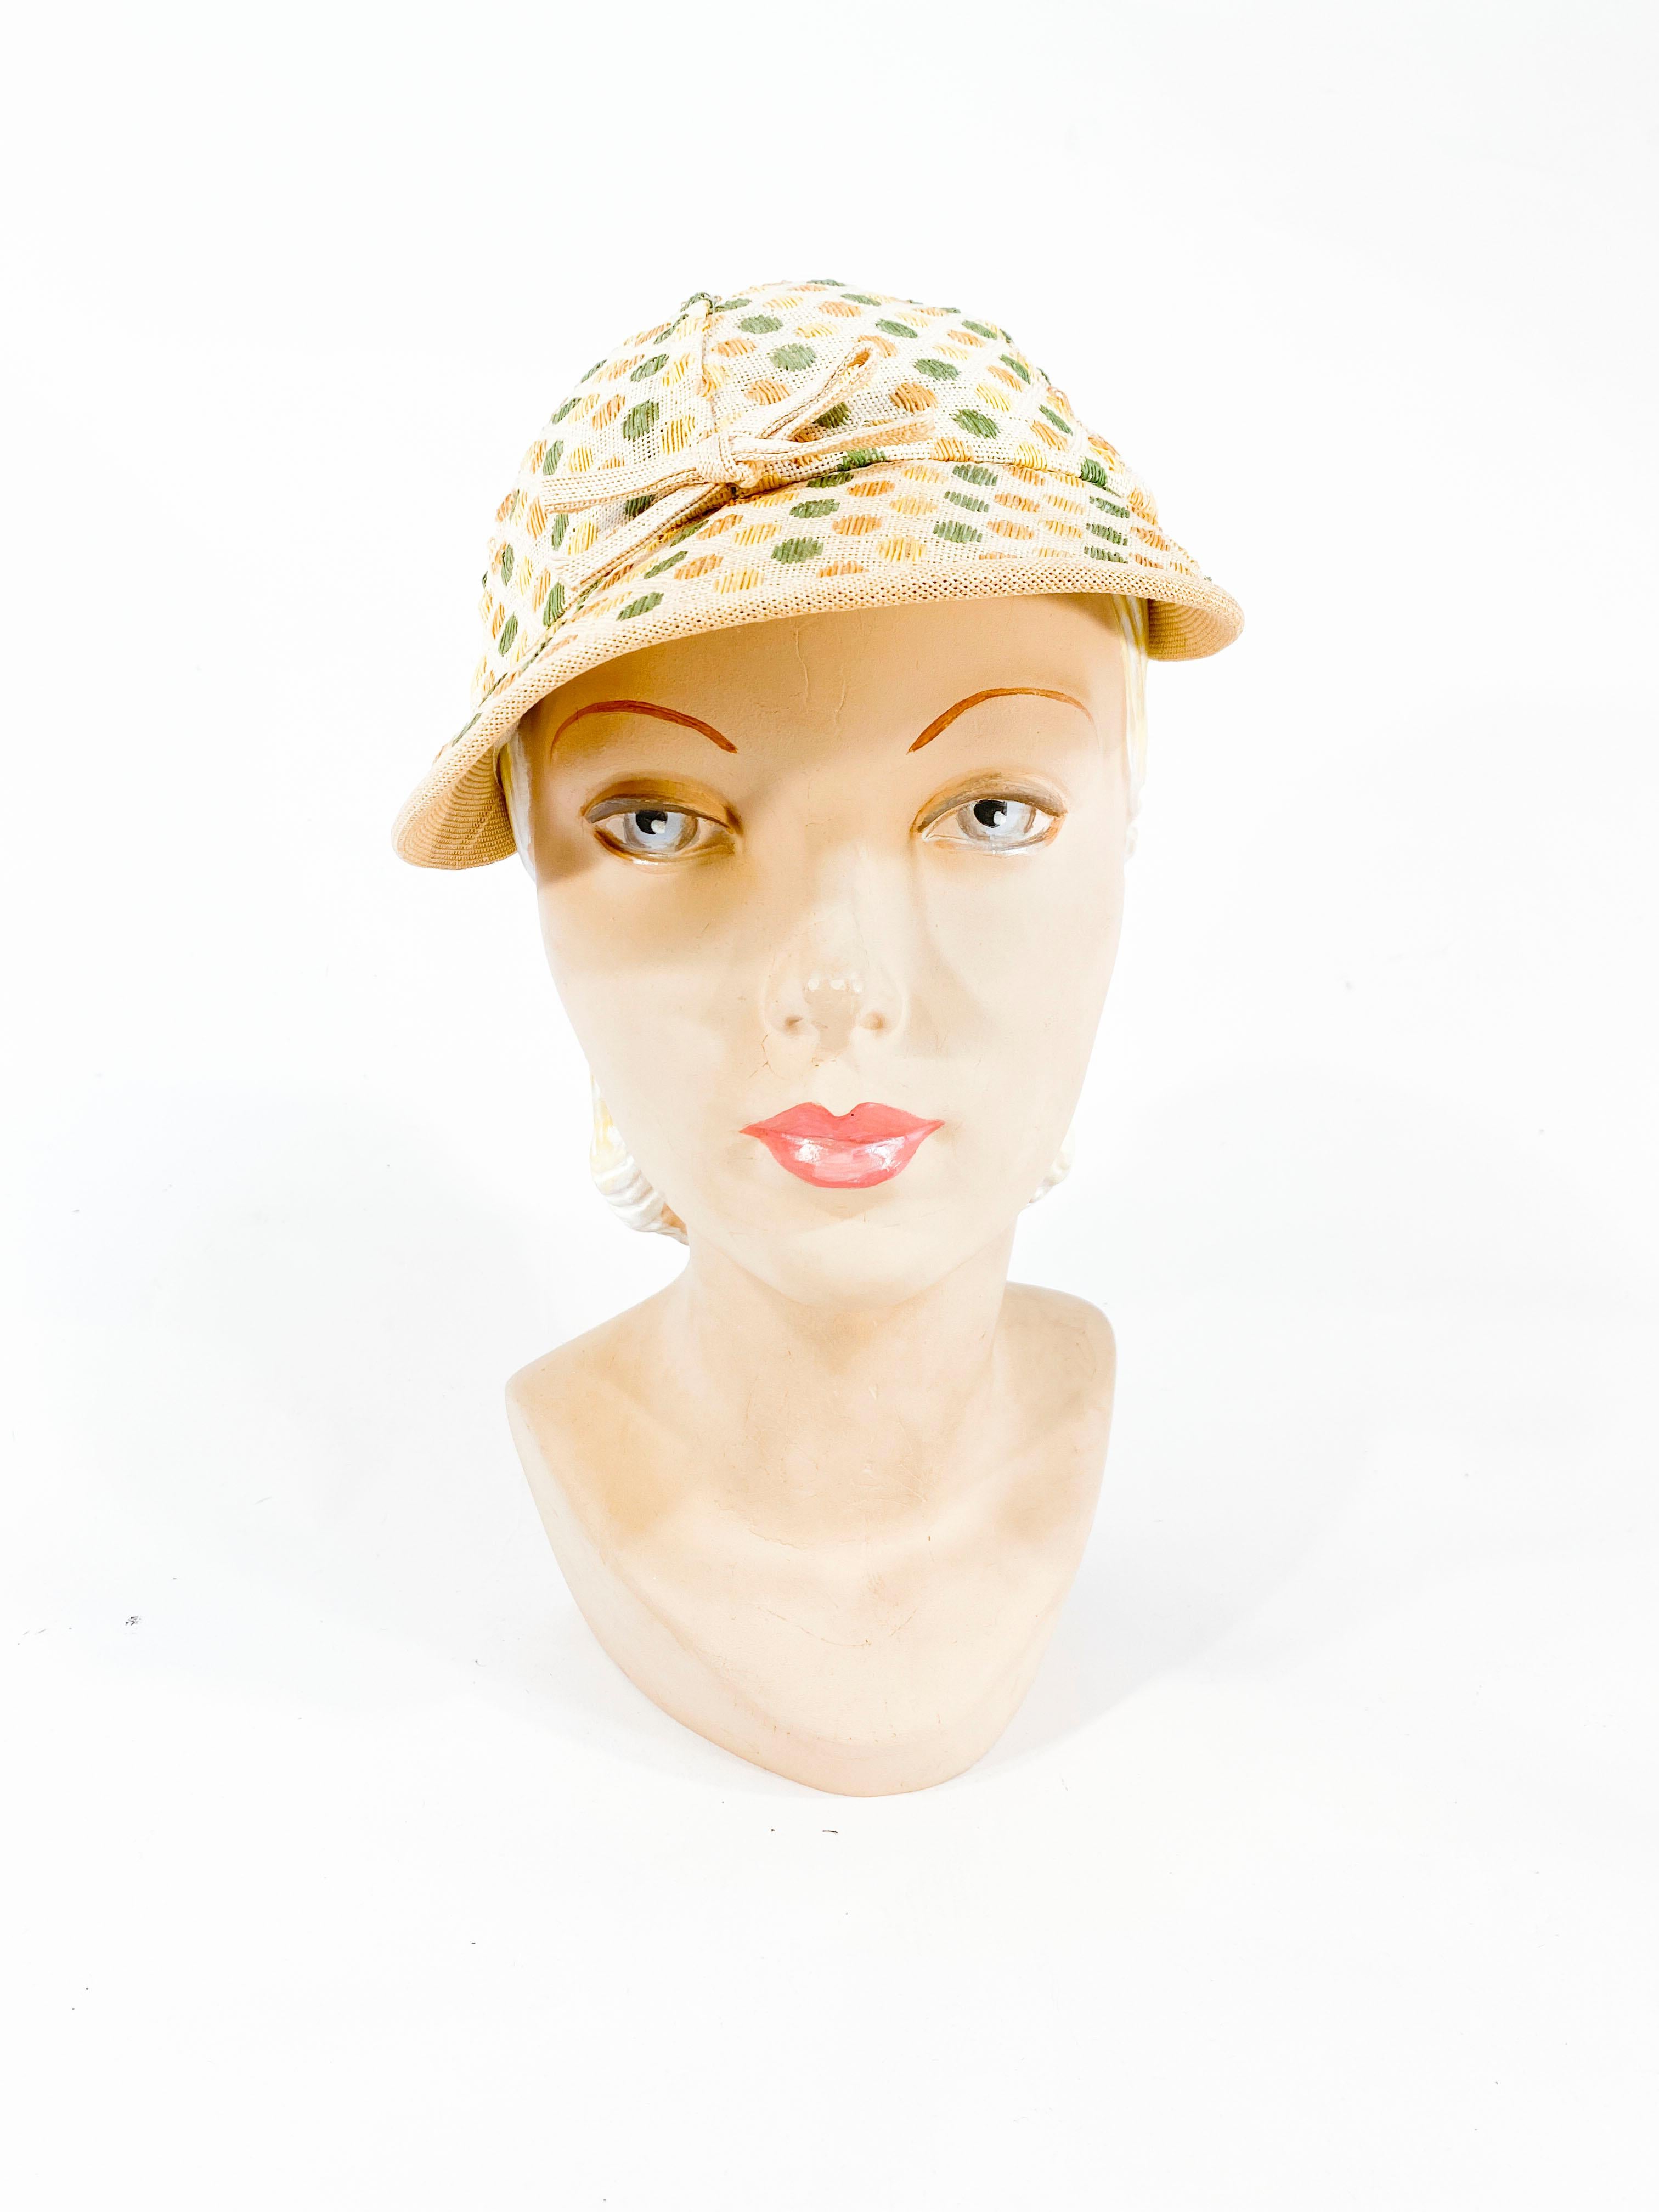 1930s polka-dot sports/golf hat featuring shades of green, gold, and yellow dots woven into a coated canvas. The hat is finished with a tied bow centered on the front brim and a covered button top. 